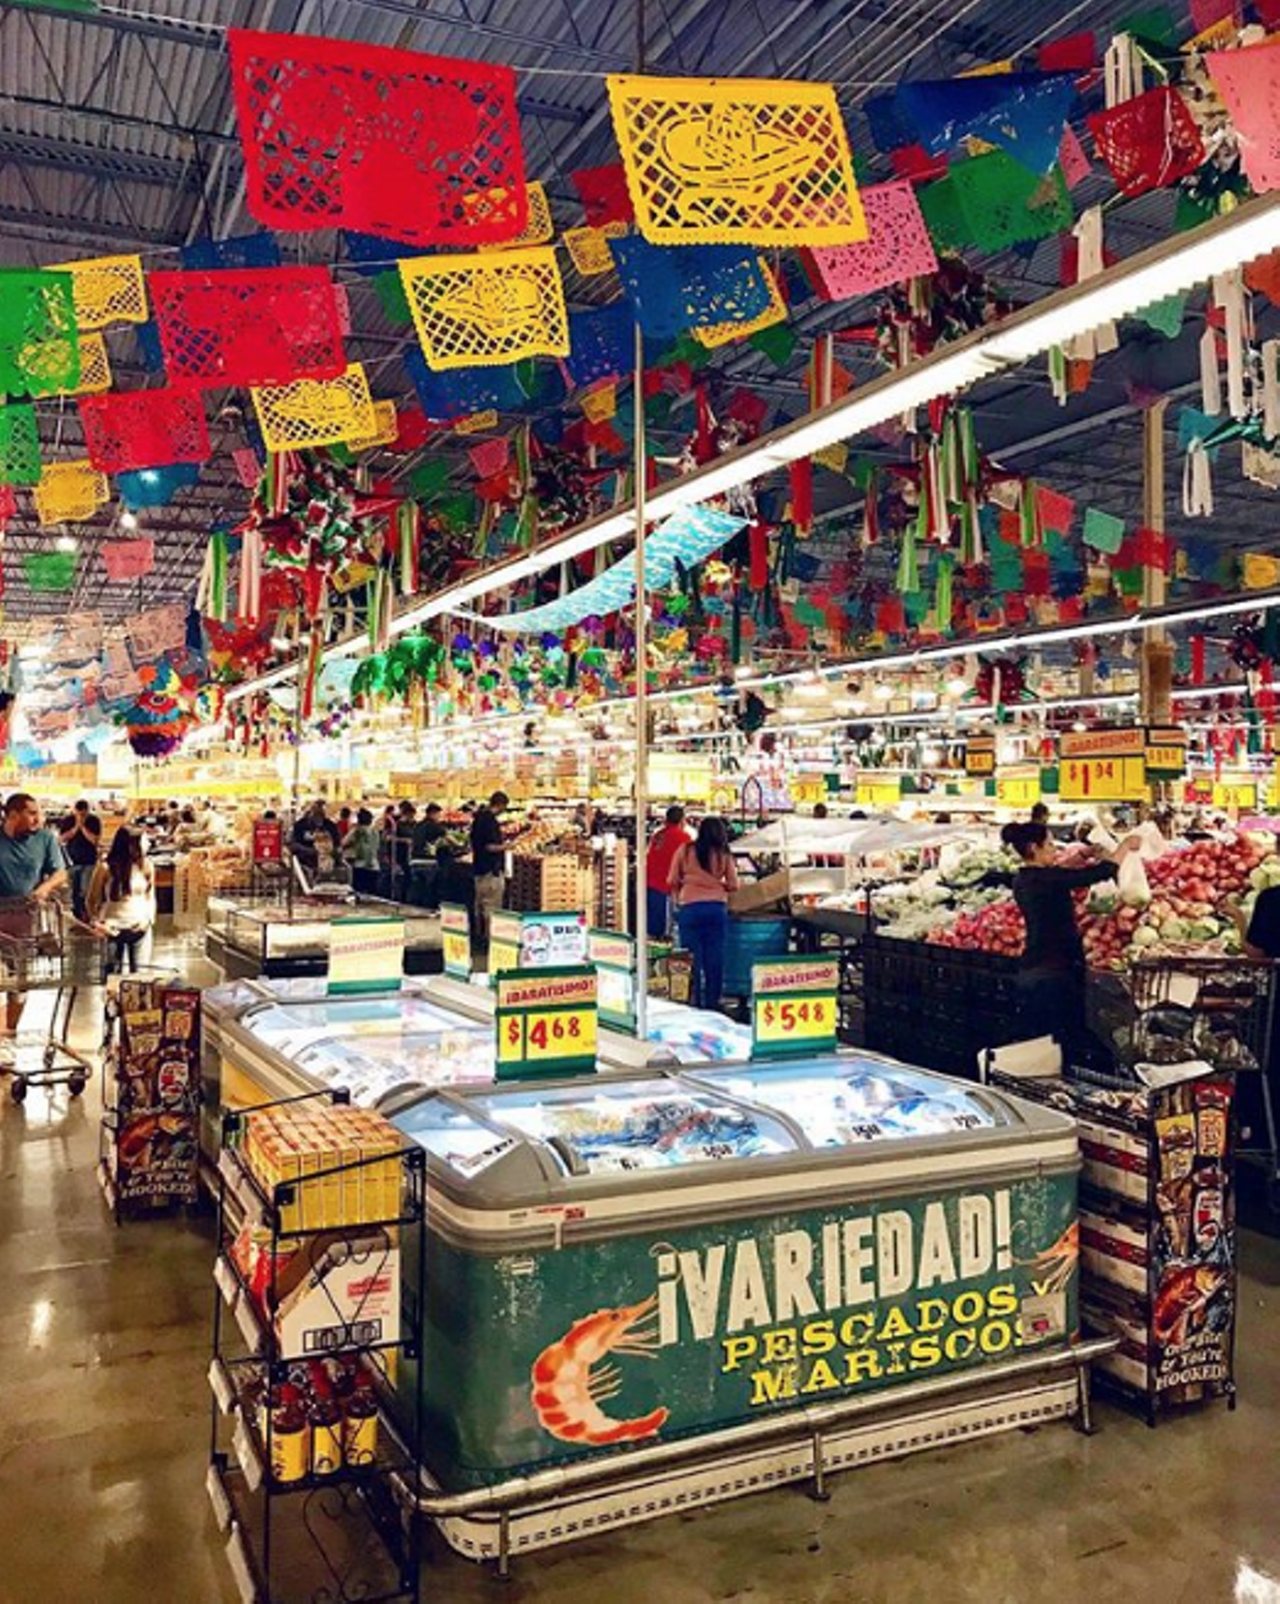 The company has a Latino-focused supermercado in Houston.
Ever noticed the Mi Tienda brand within H-E-B stores? Well, Houston has an entire grocery store full of those kinds of goods, with lots of food products aimed at Latin households. Perhaps it’s just a matter of time until San Antonio gets a Mi Tienda of its own.
Photo via Instagram / reidissolare